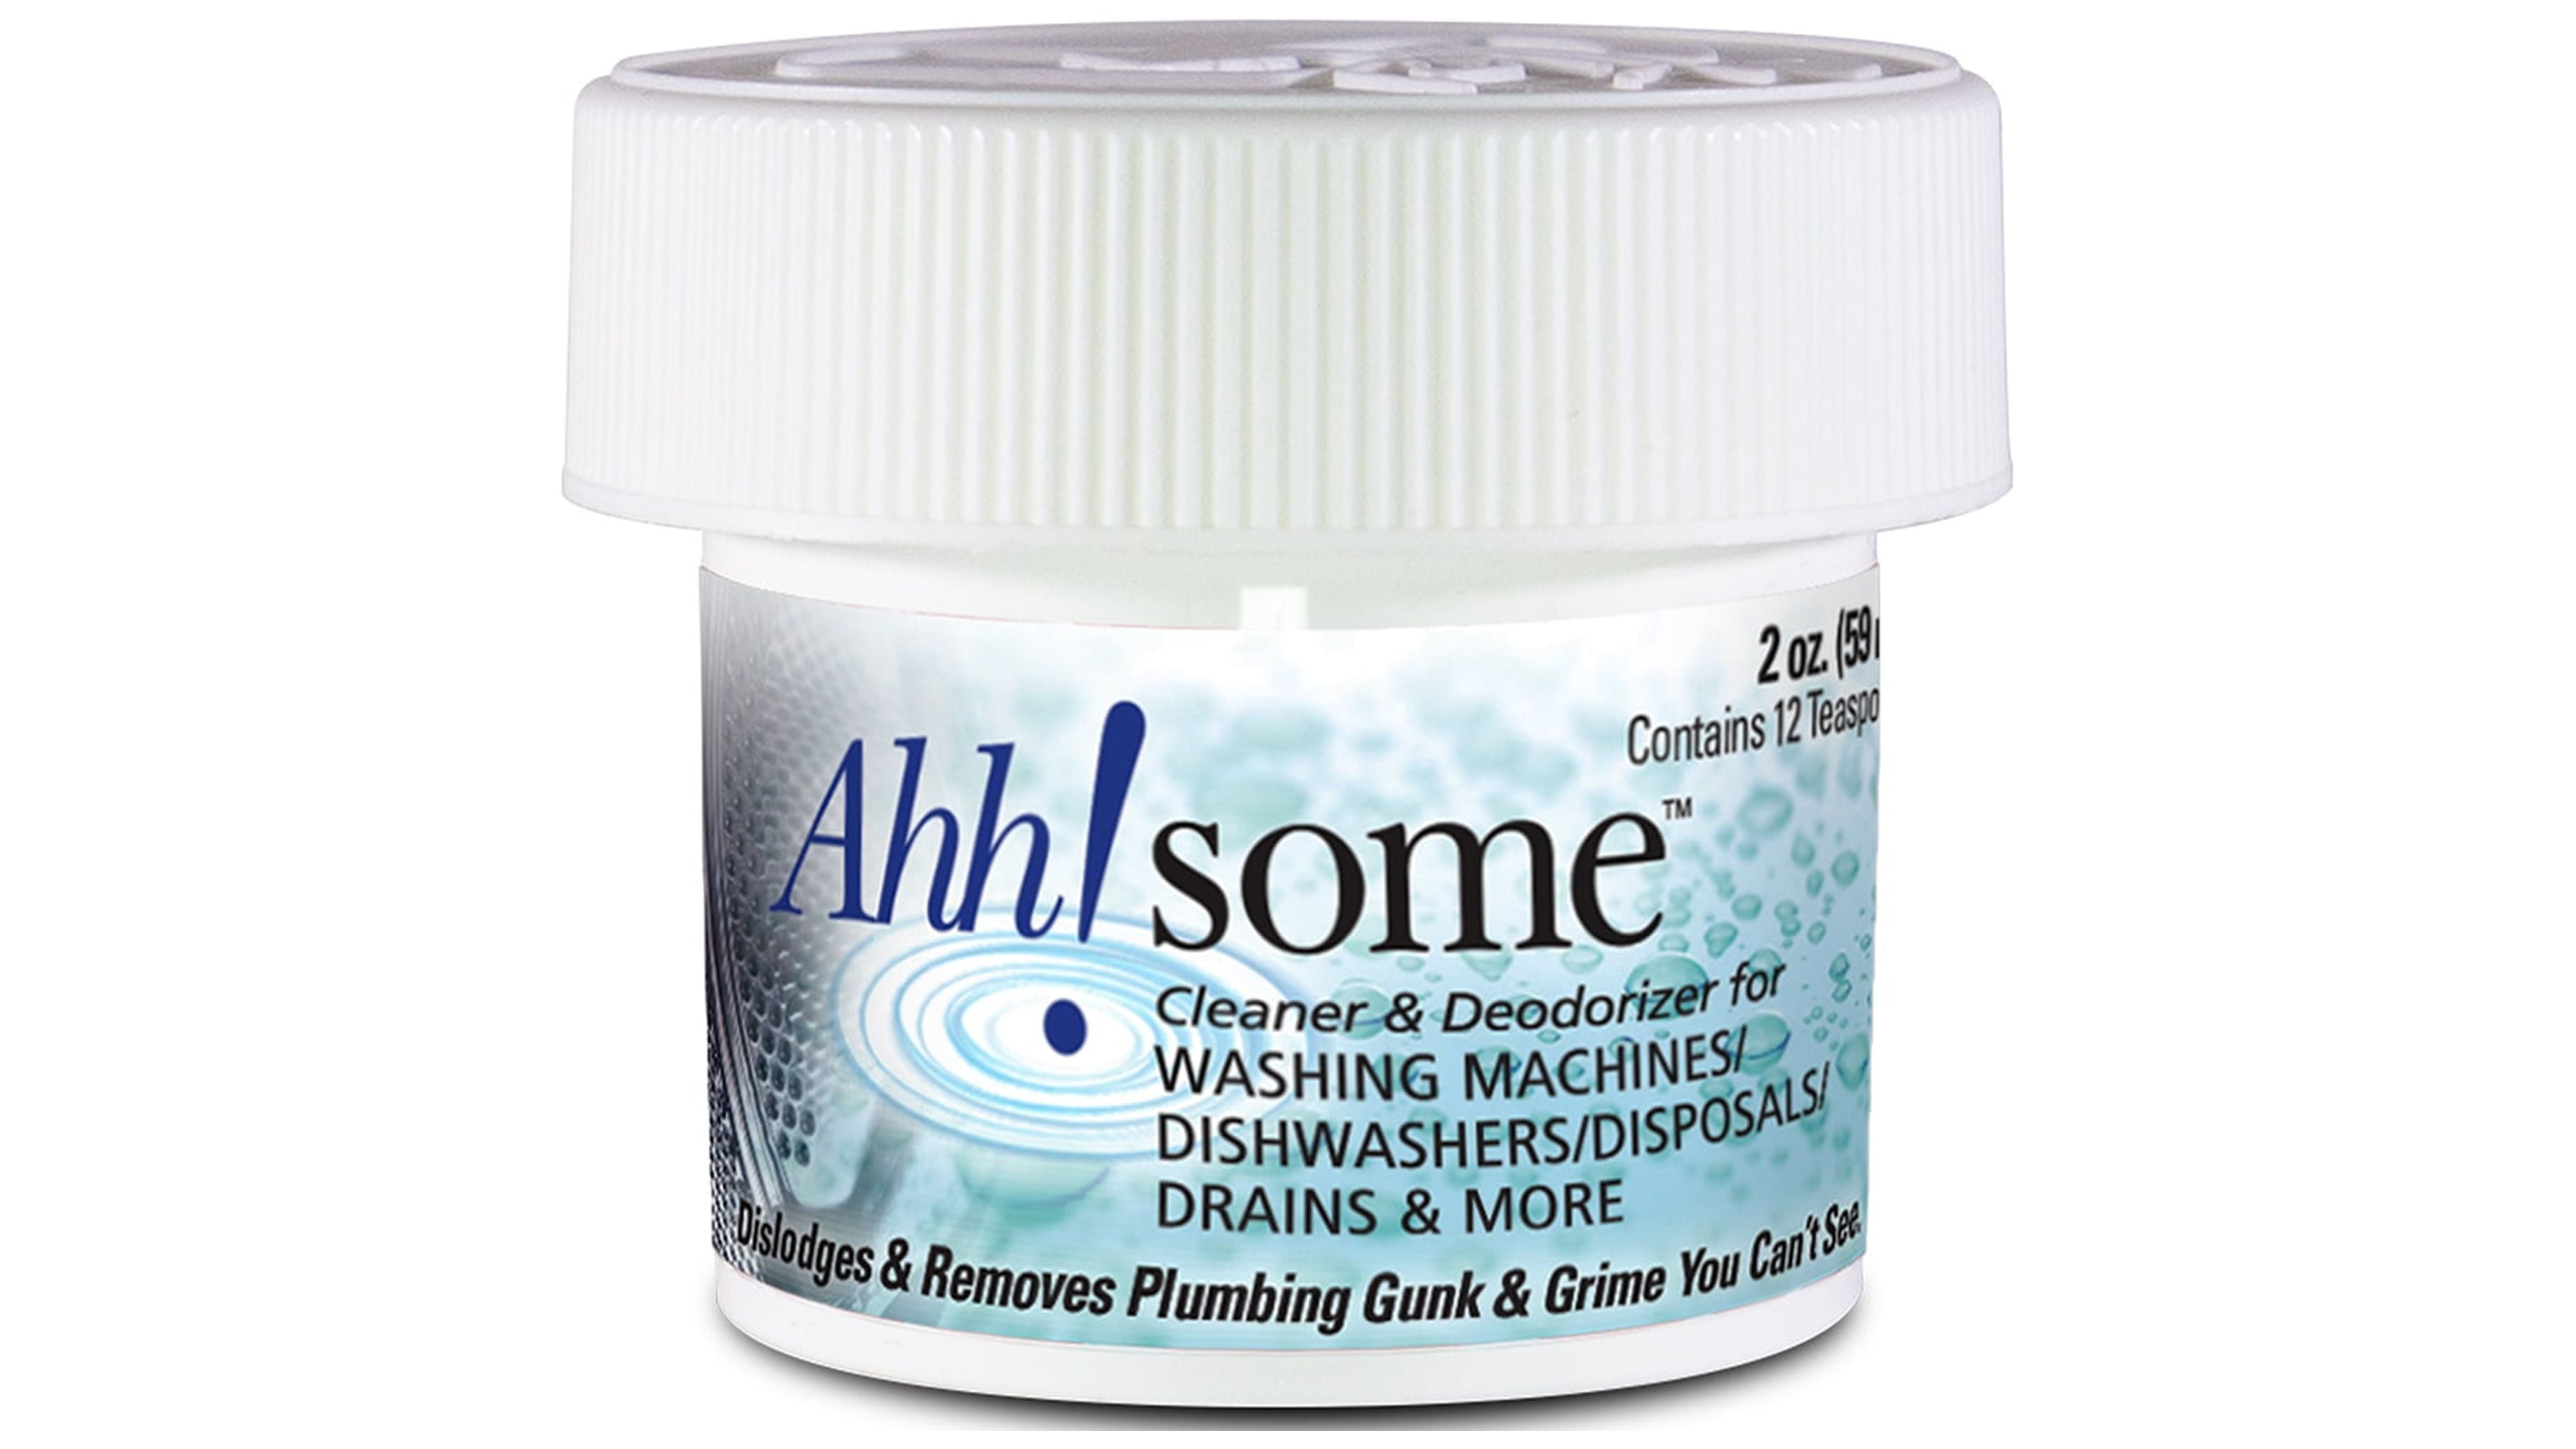 Ahh-Some - Washing Machine Cleaner - Top Load and Front Load - Dishwasher,  Bio-Cleaner and Deodorizer - Works For All Washers - Removes Odor, Residue,  Mold, Mildew (2 oz.) 